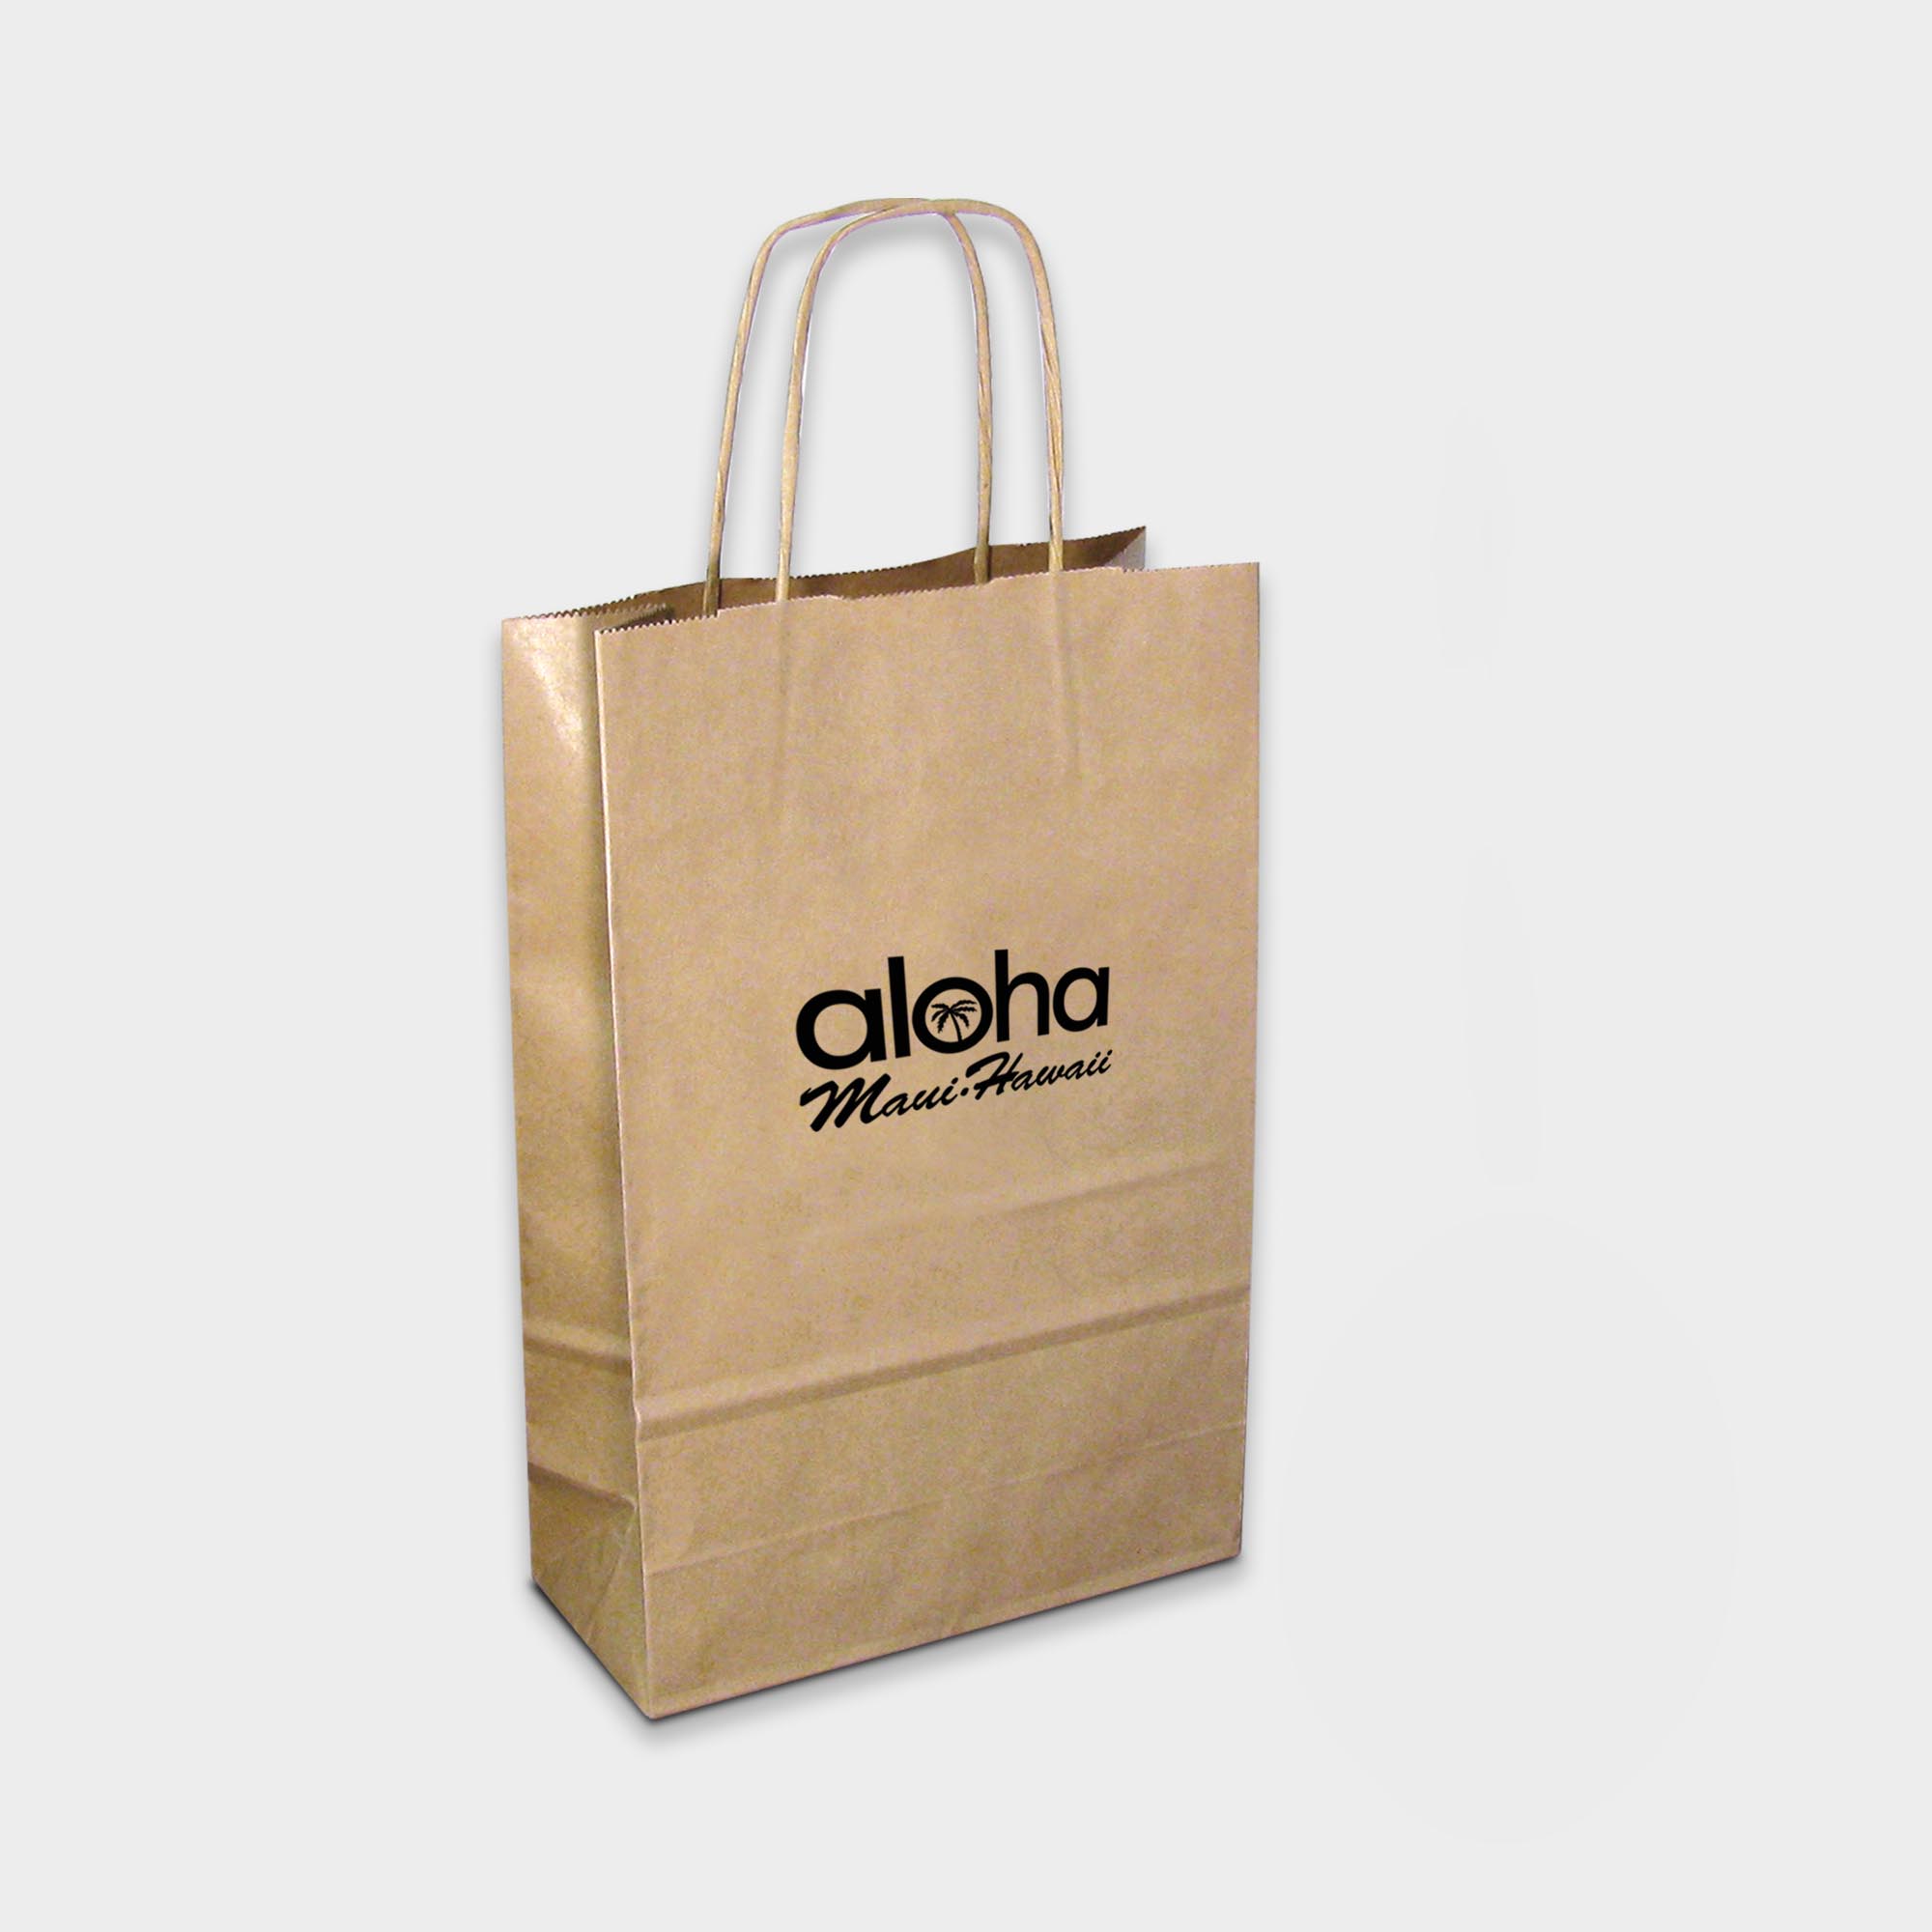 The Green & Good Kraft Bag is made using sustainable paper. The twisted "cord" handles are made from 100% sustainable paper and the bag is available in both brown and white. Made in the EU. 100gsm. Brown